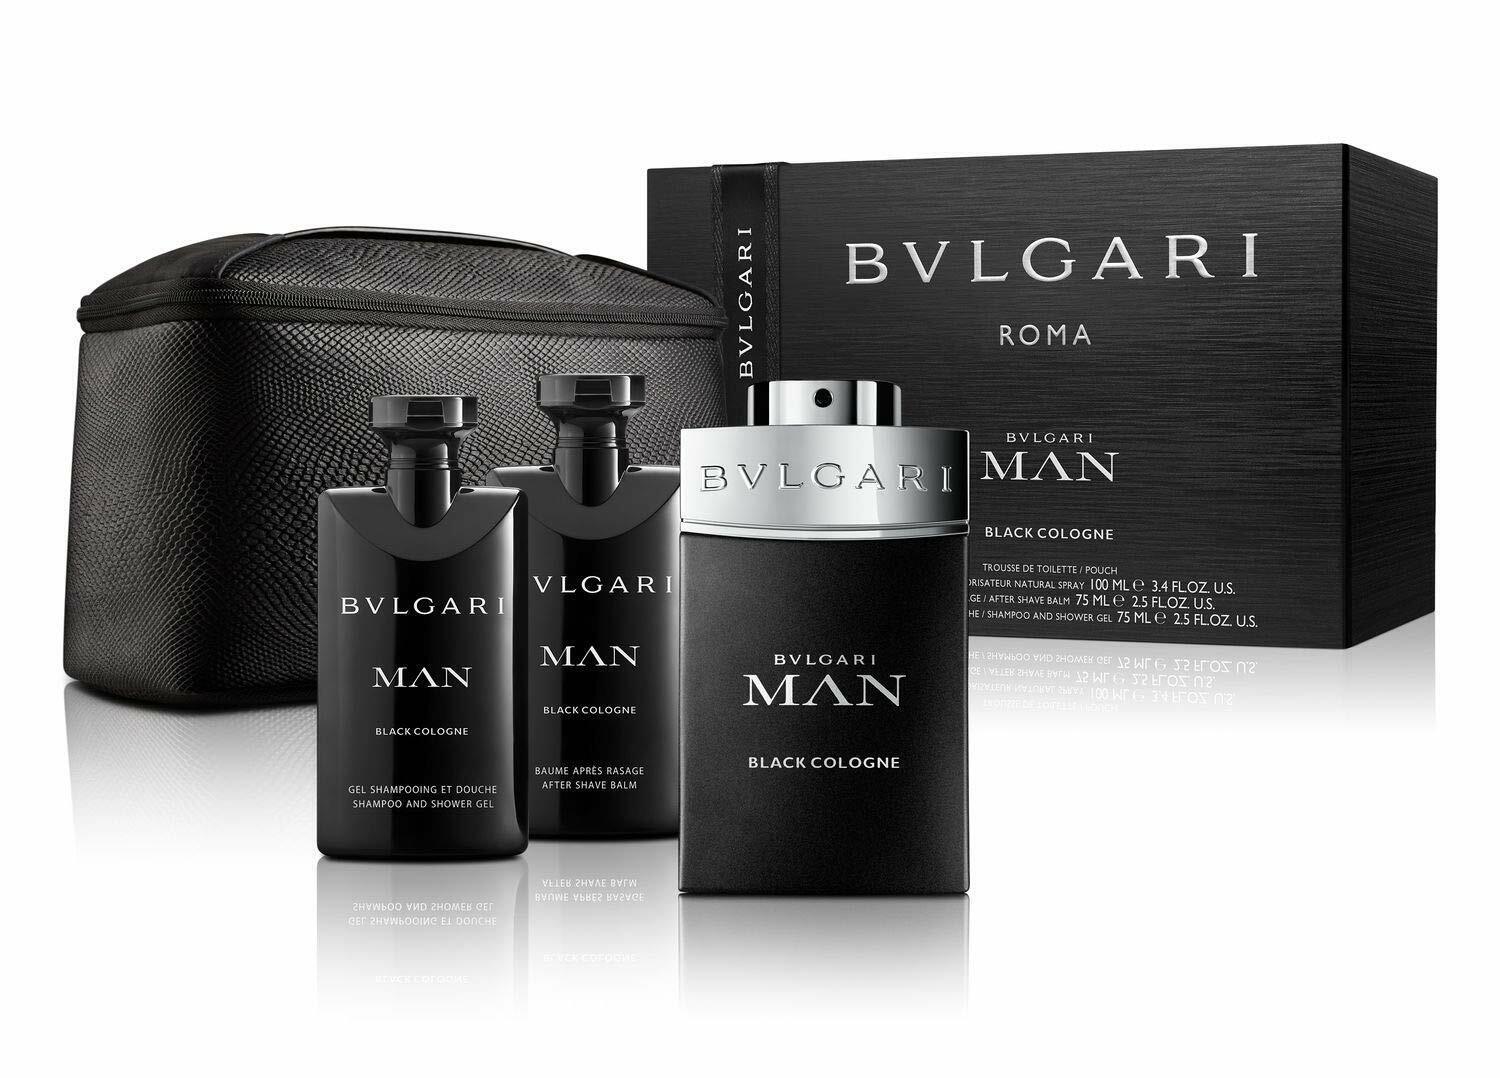 Blv Pour homme by Bvlgari Gift set for men 4 piece gift set